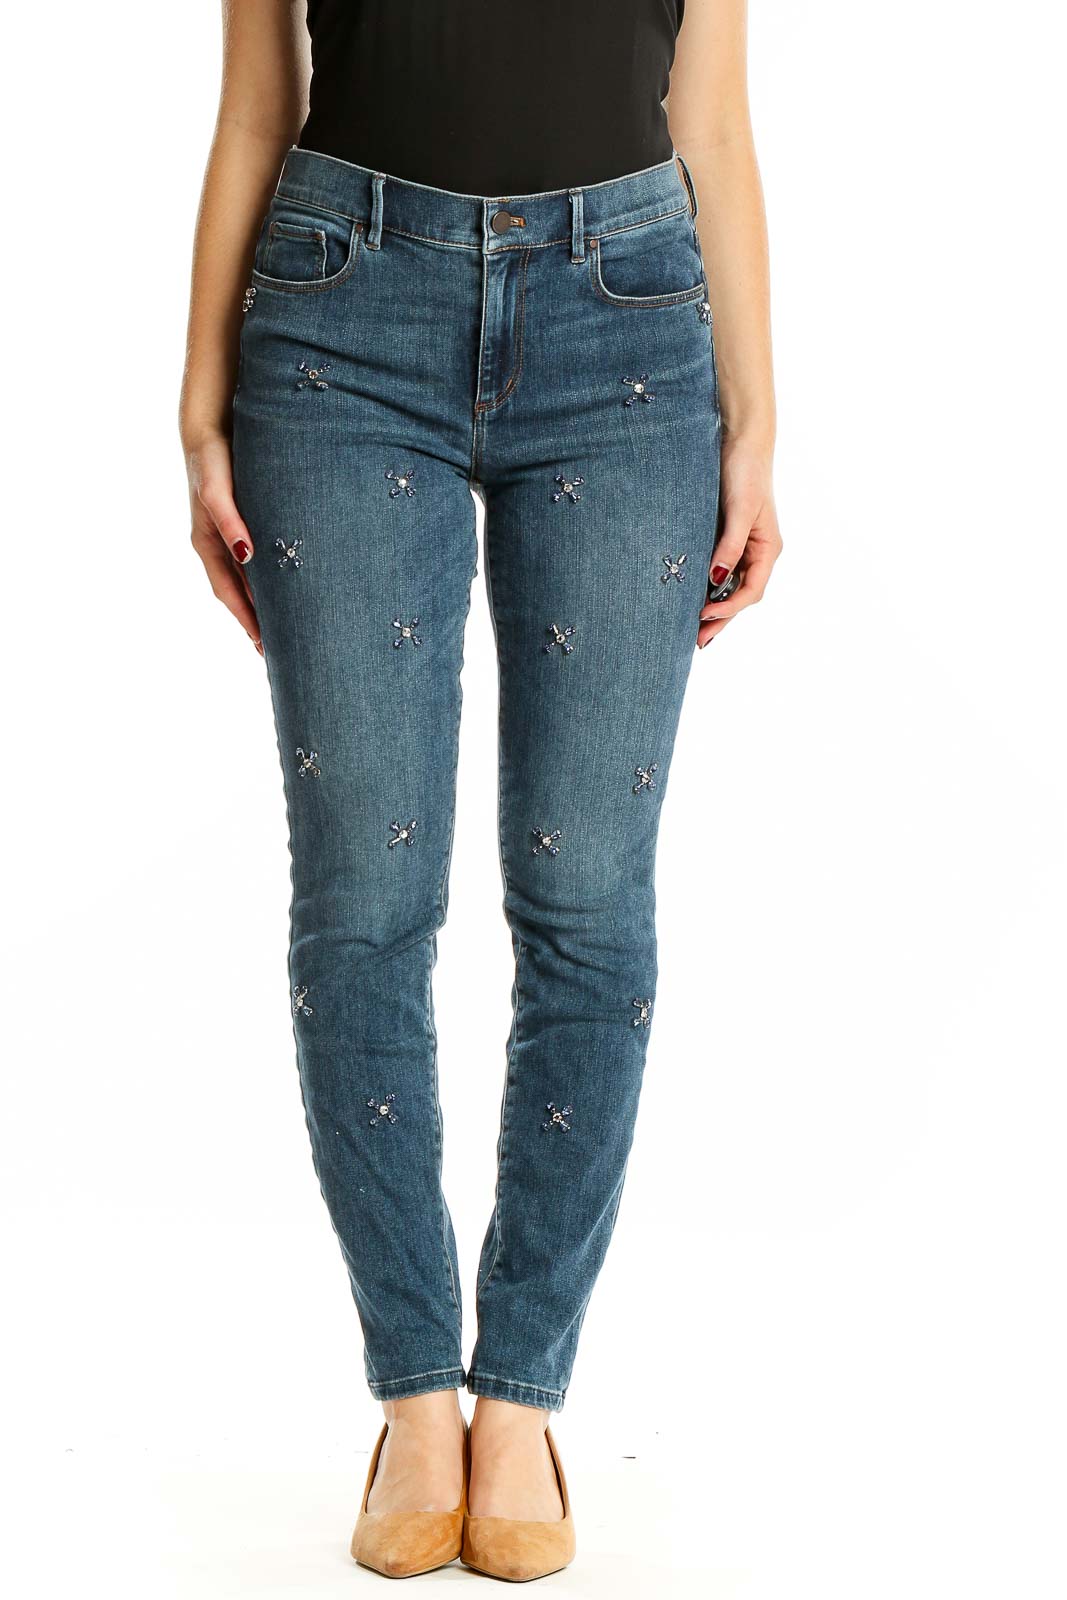 Blue Dark Rinse Jeans Front